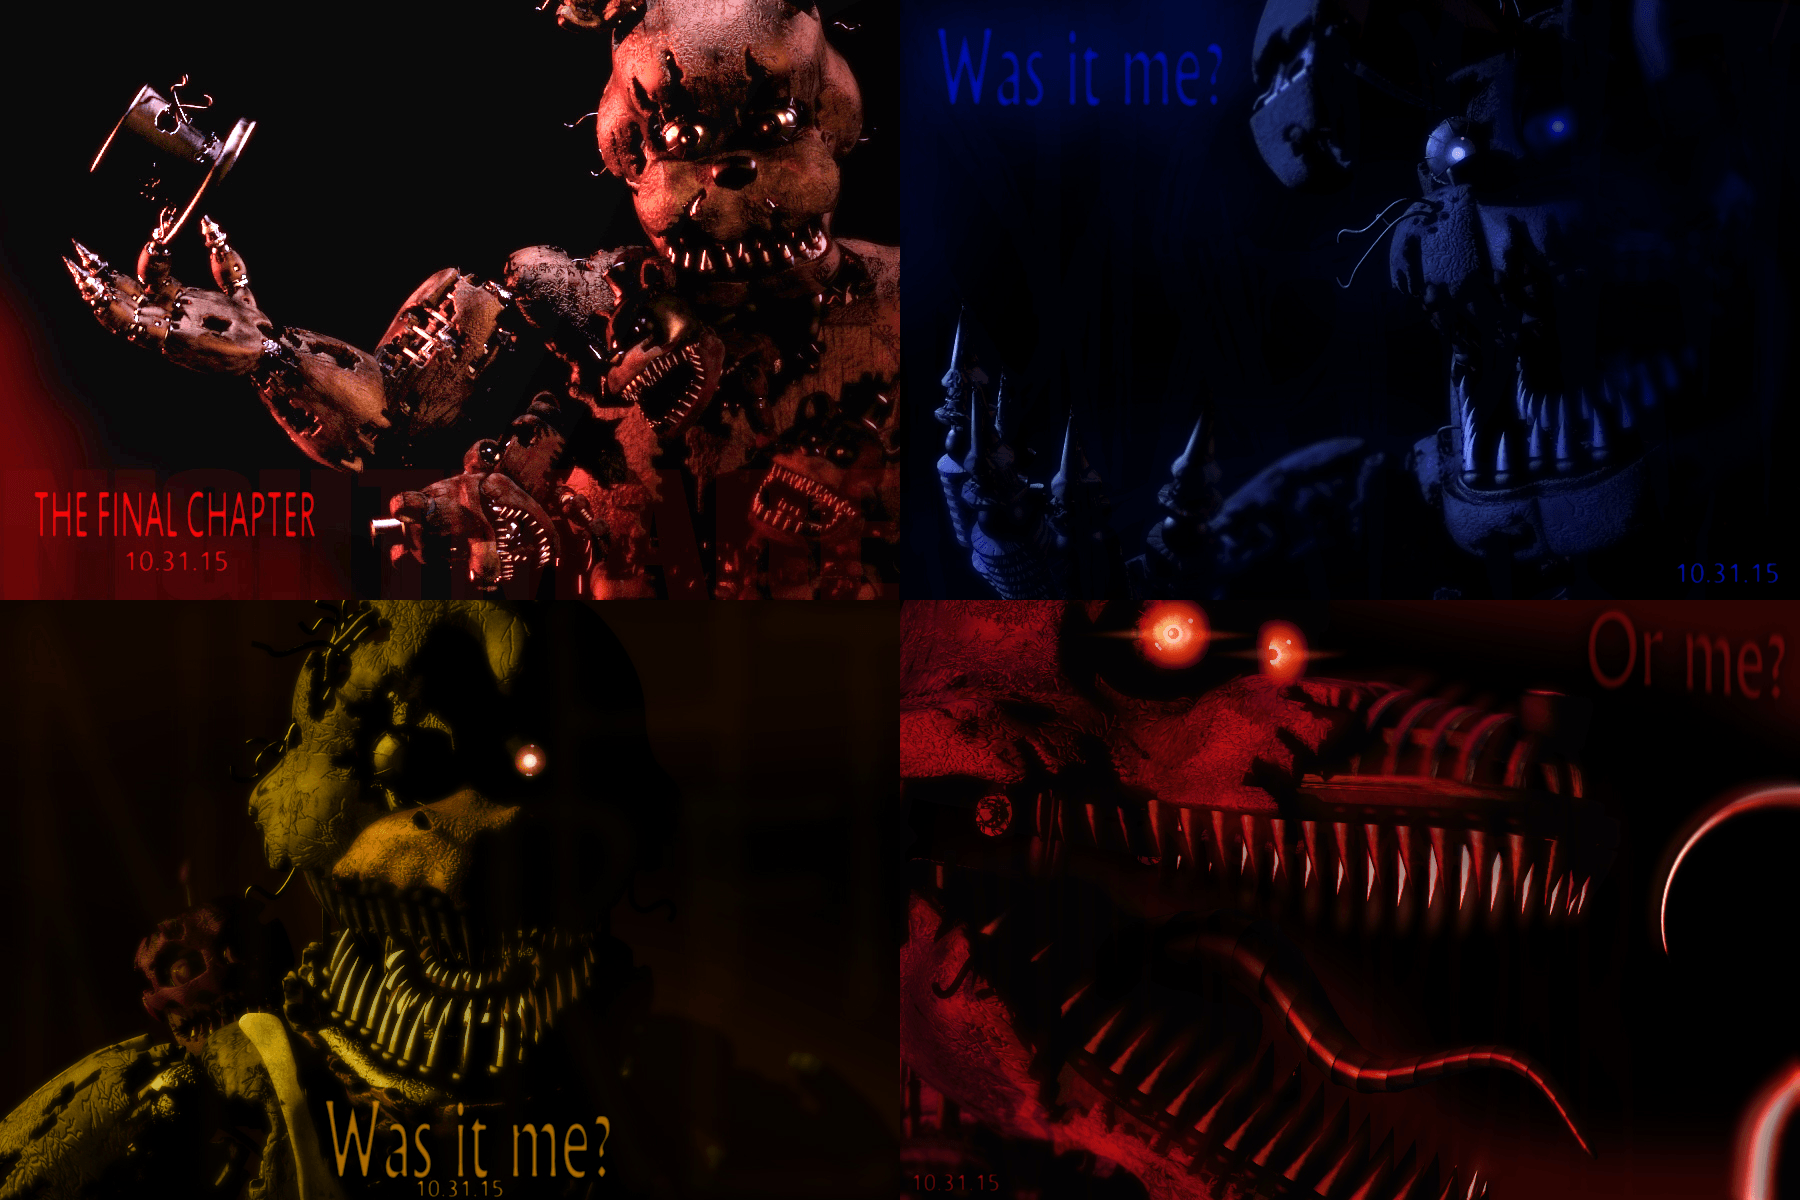 The 4 nightmares. Five Nights at Freddy's